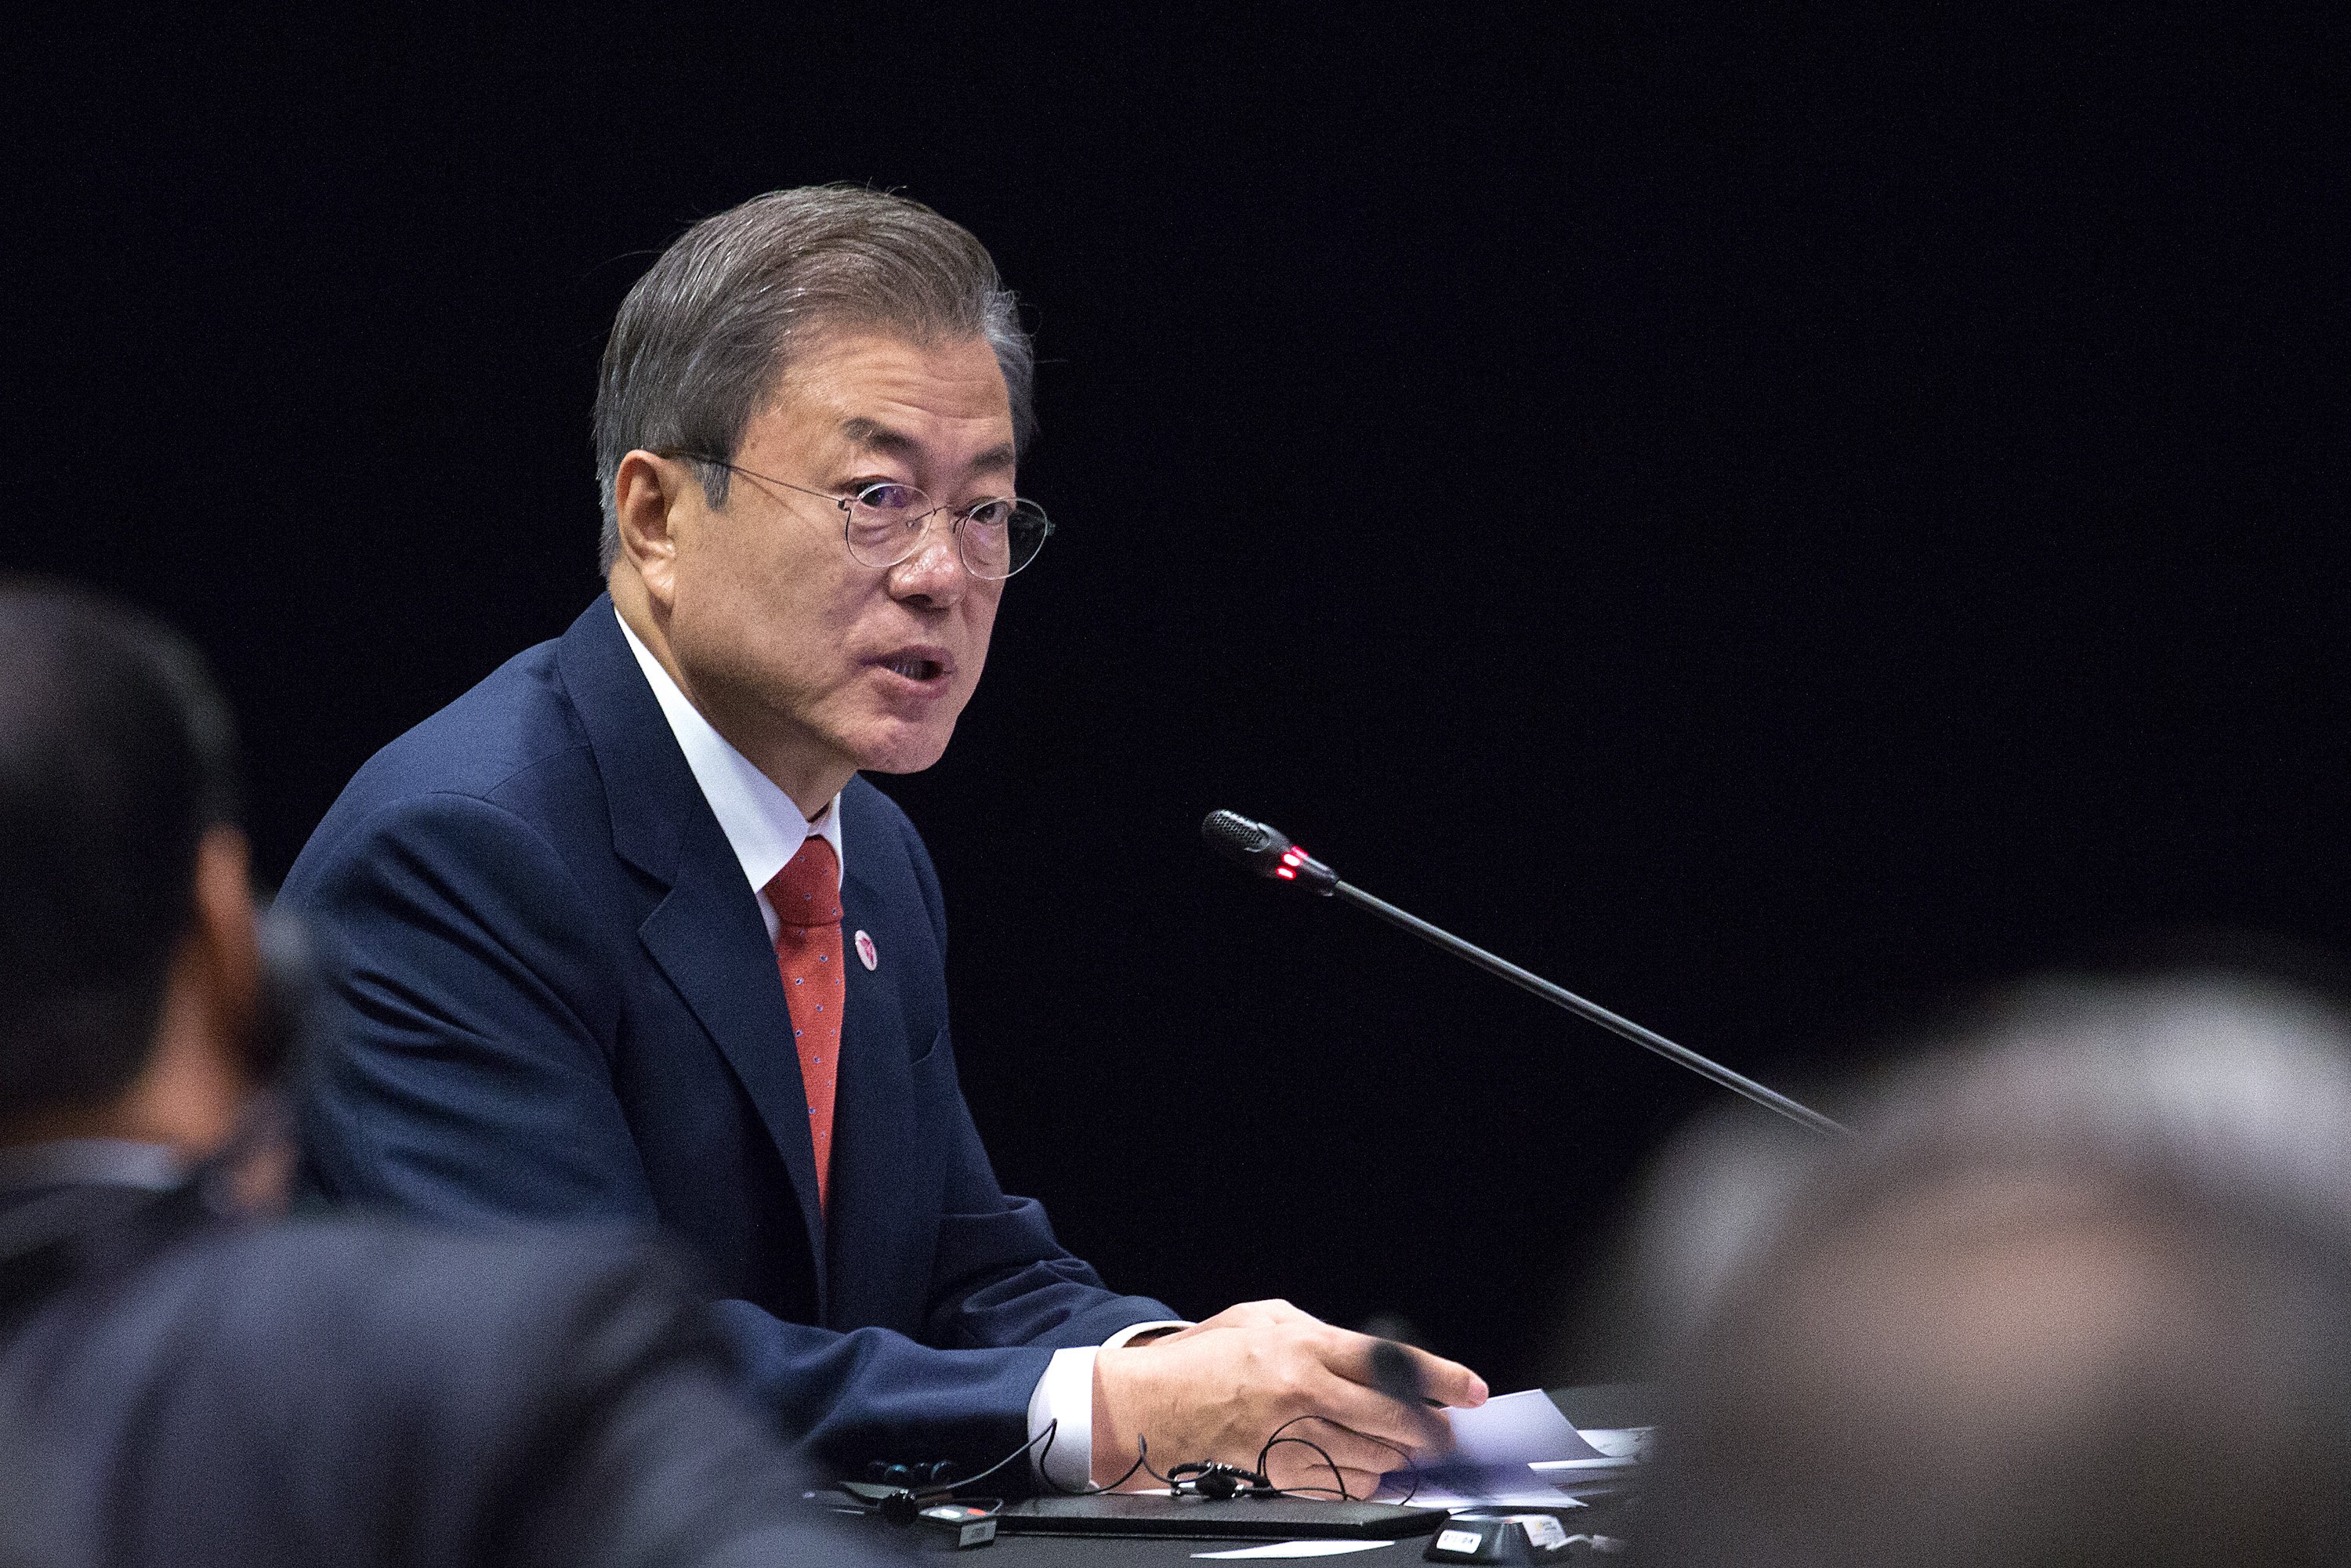 SINGAPORE, SINGAPORE - November 14: South Korea's President Moon Jae-In speaks during the ASEAN-China summit on the sidelines of the 33rd Association of Southeast Asian Nations (ASEAN) summit on November 14, 2018 in Singapore. Leaders from around the world gathered this week in Singapore during the 33rd ASEAN Summit as well as related summits, including Russian President Vladimir Putin as well as U.S. Vice President Mike Pence and Chinese Premier Li Keqiang, who joined the meetings amidst ongoing trade tensions between Washington and Beijing.(Photo by Ore Huiying/Getty Images)